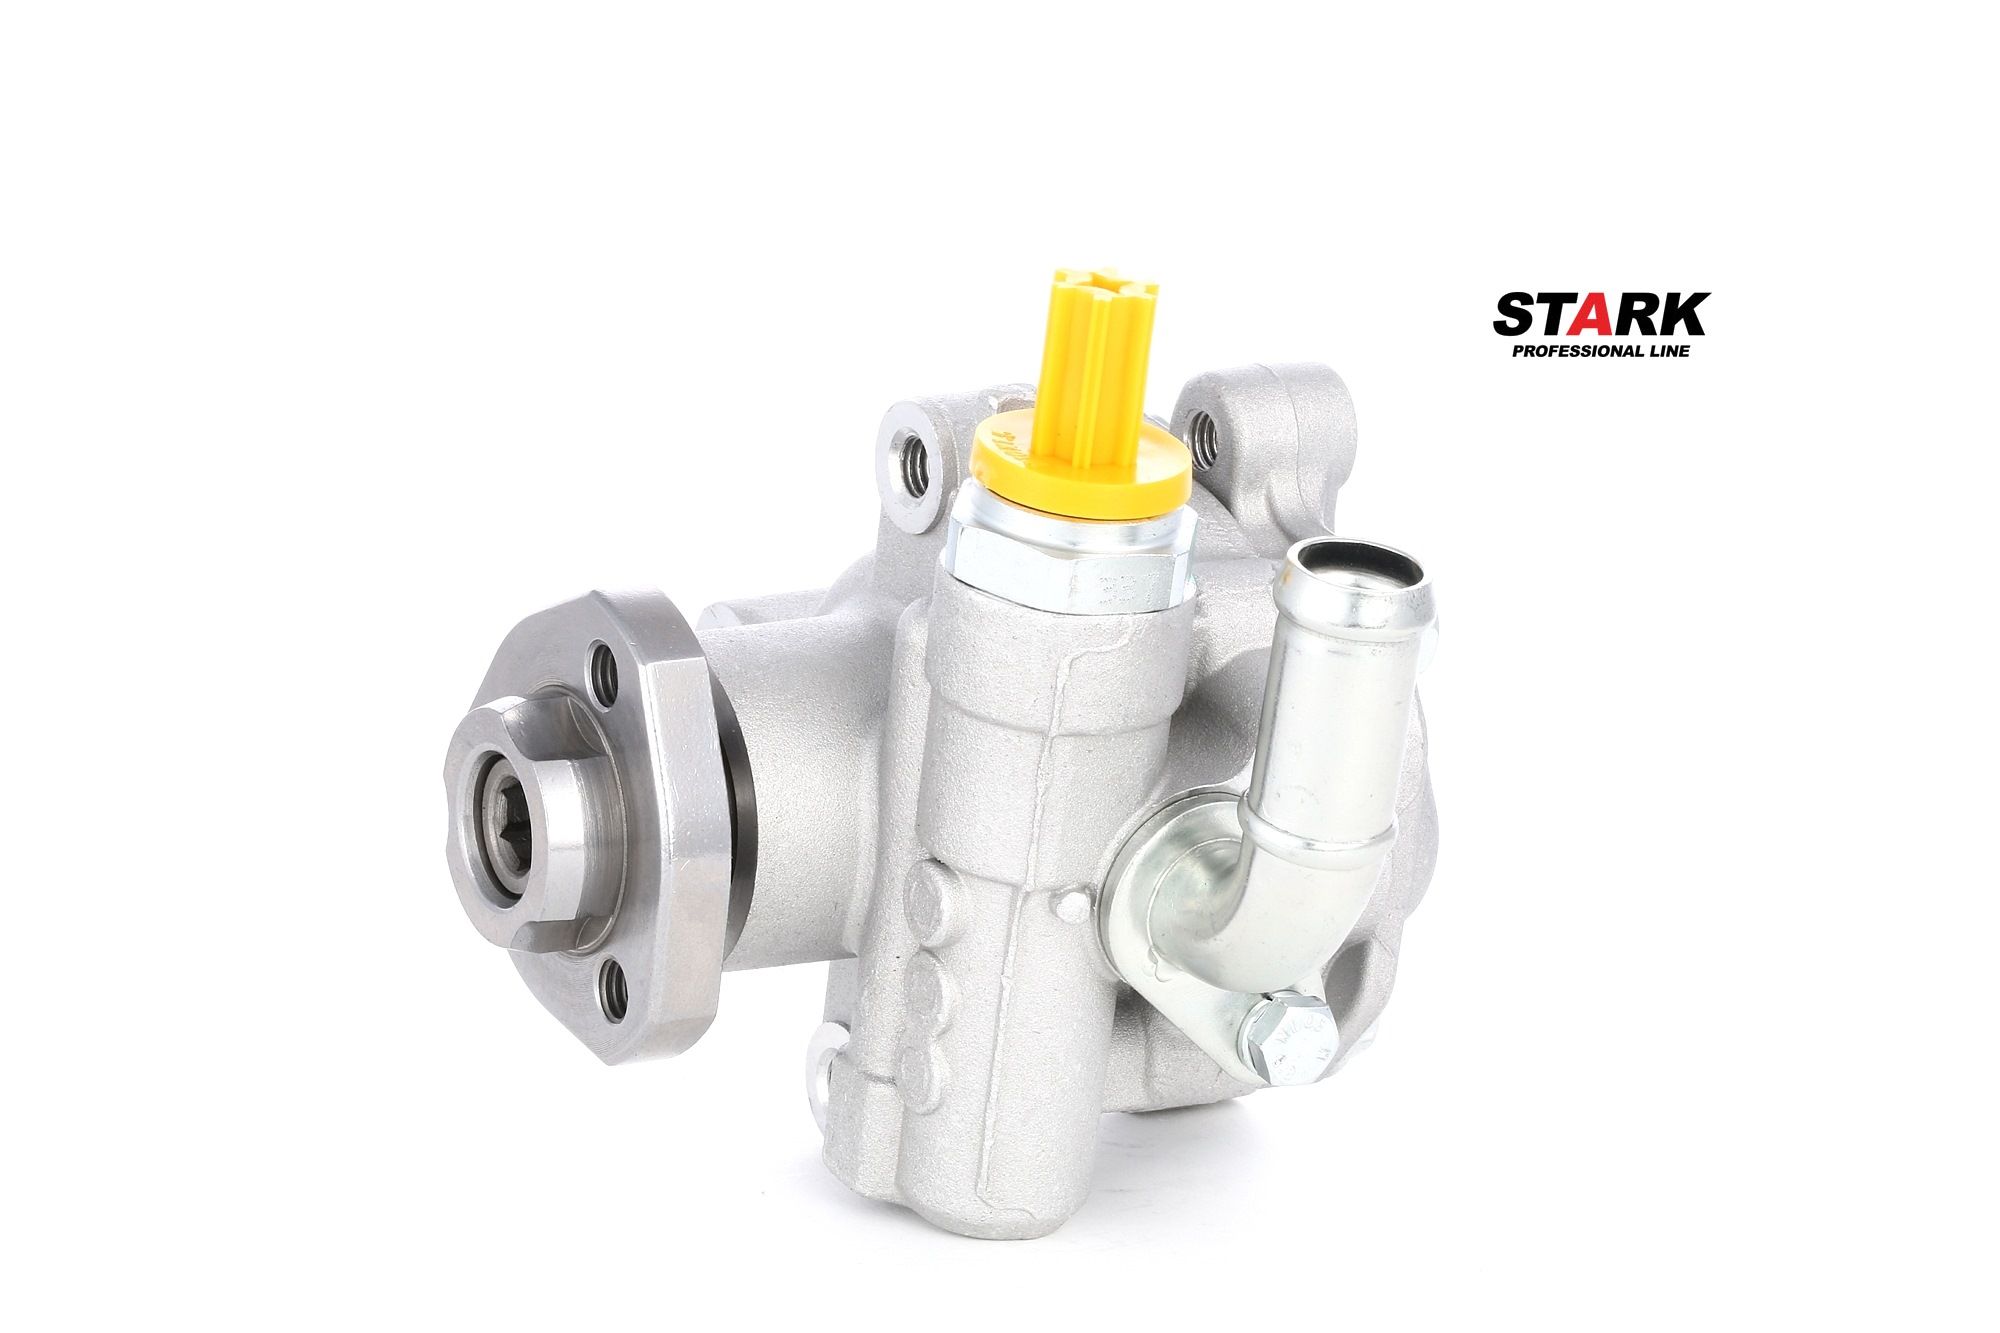 STARK SKHP-0540055 Power steering pump Hydraulic, 120 bar, 90 l/h, Clockwise rotation, for left-hand/right-hand drive vehicles